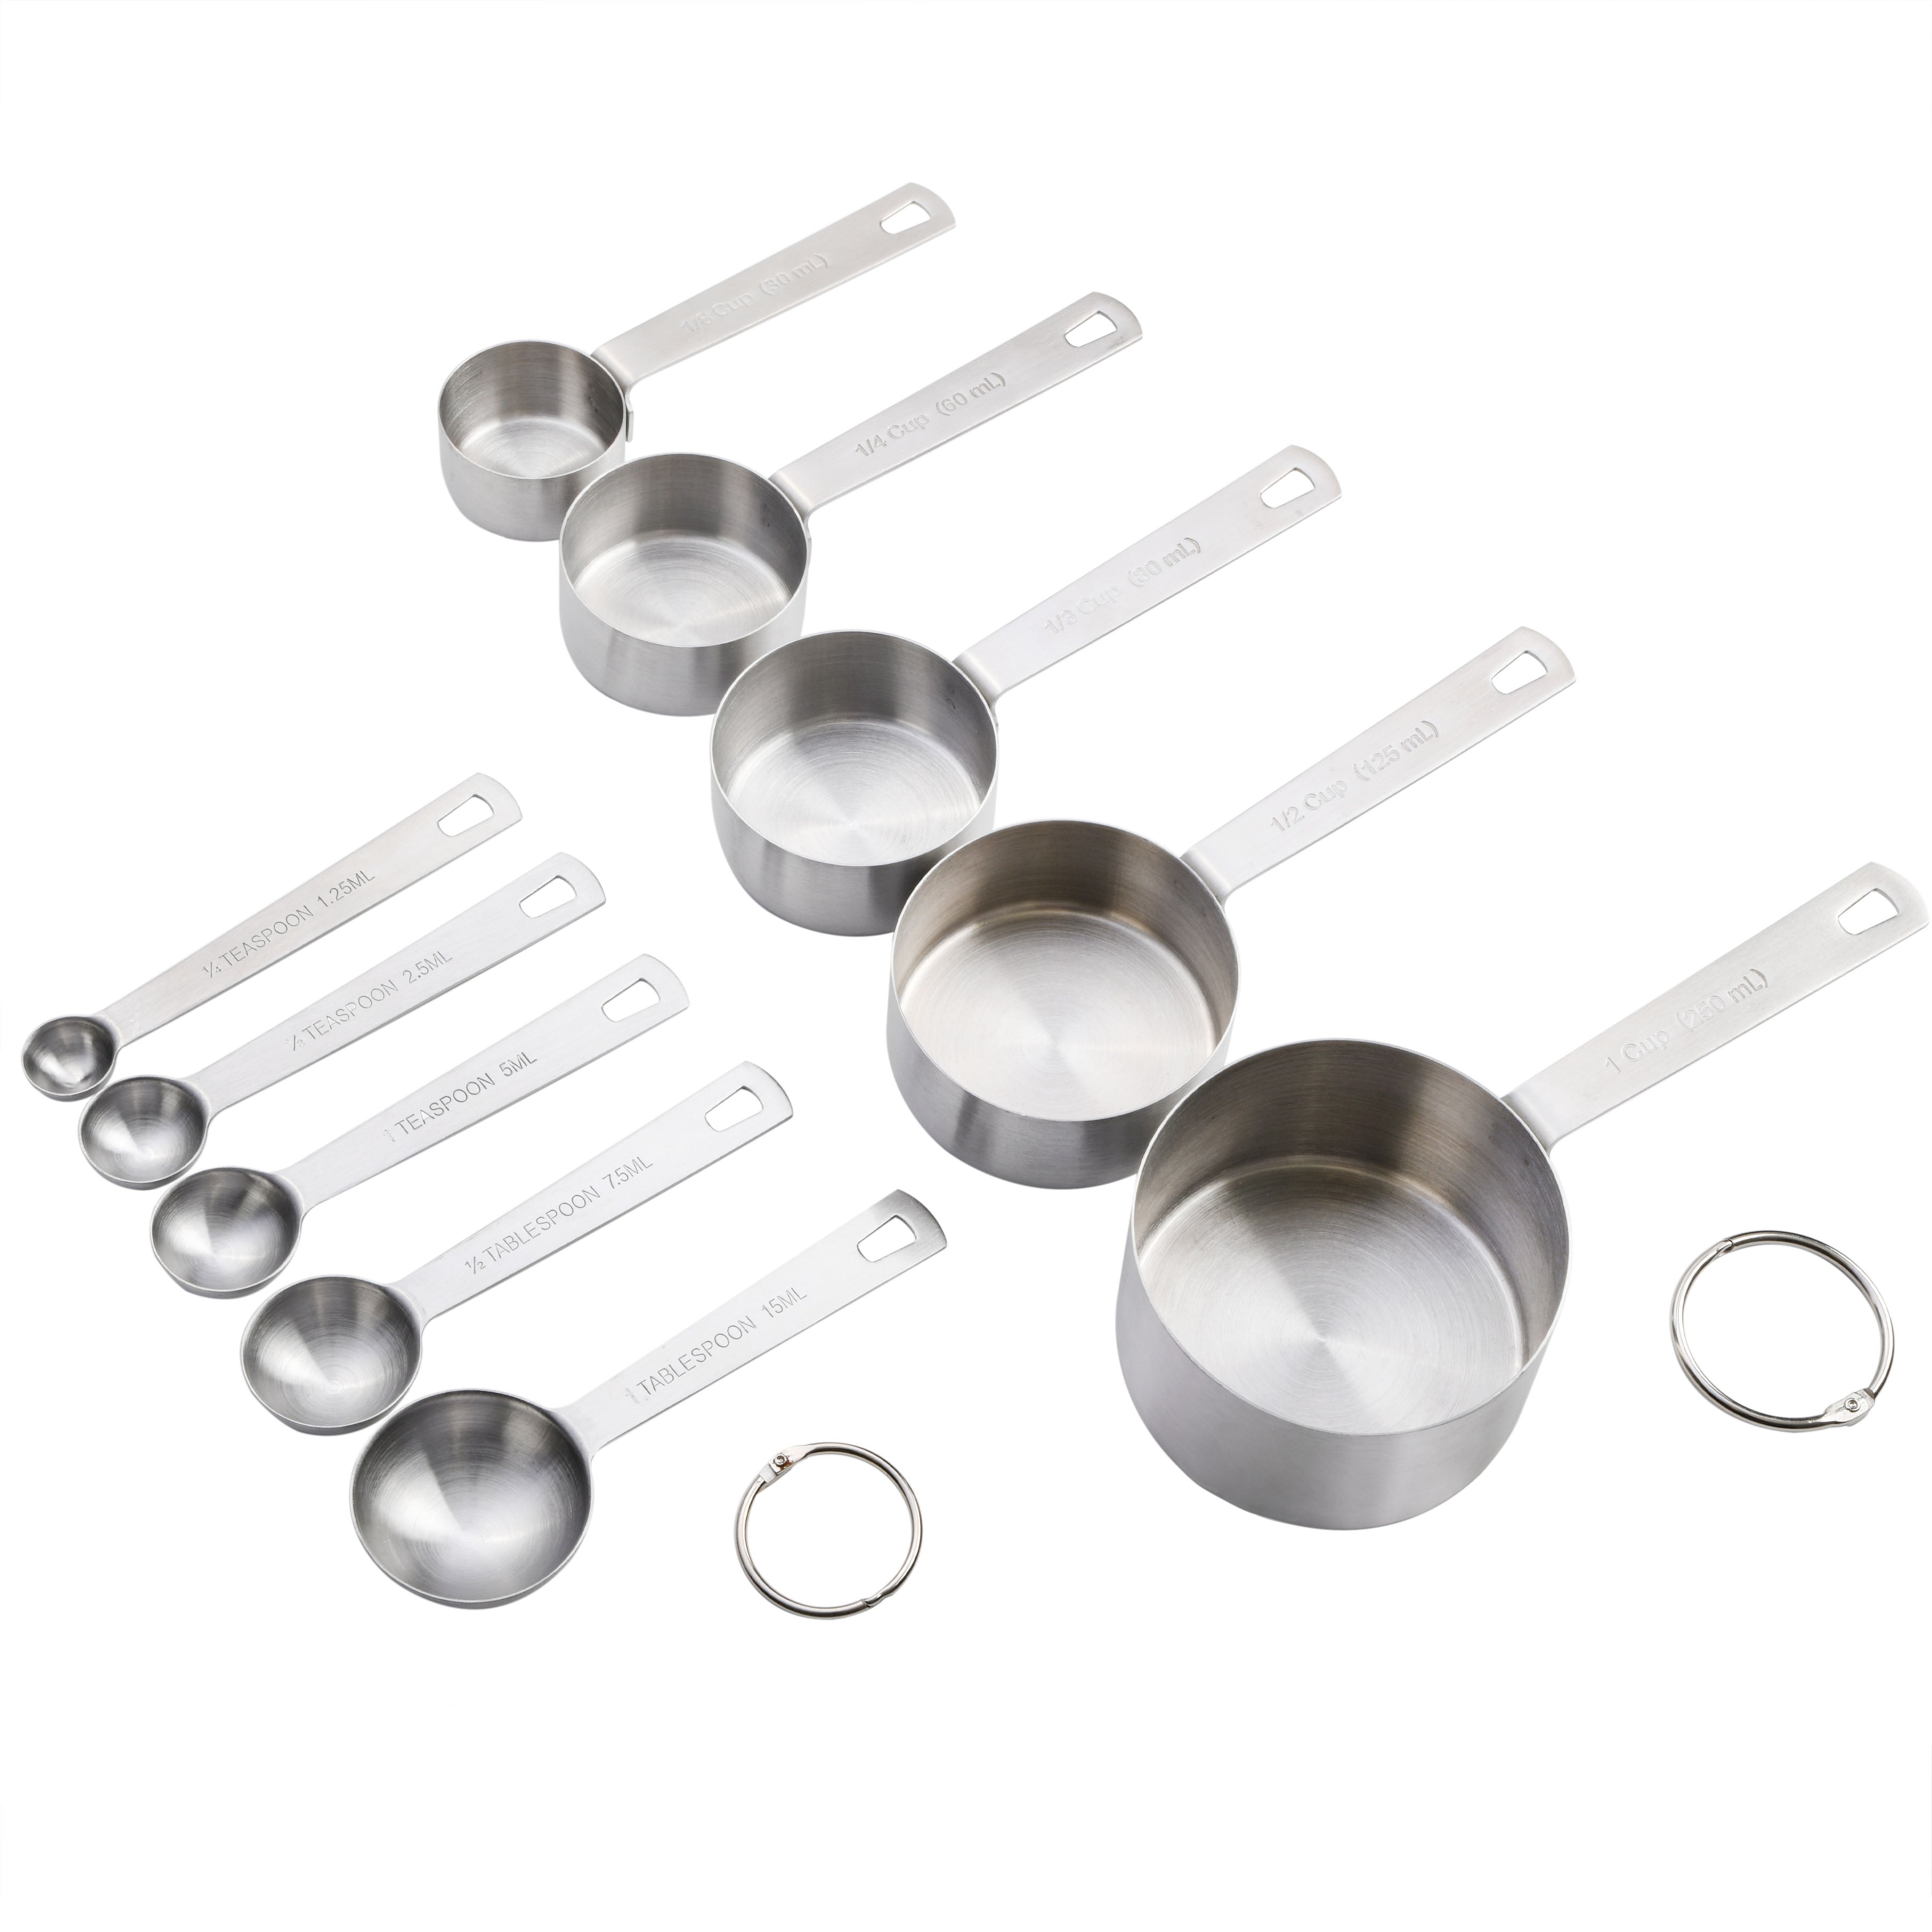 Babish 10-Piece Stainless Steel Measuring Cups & Spoons Set